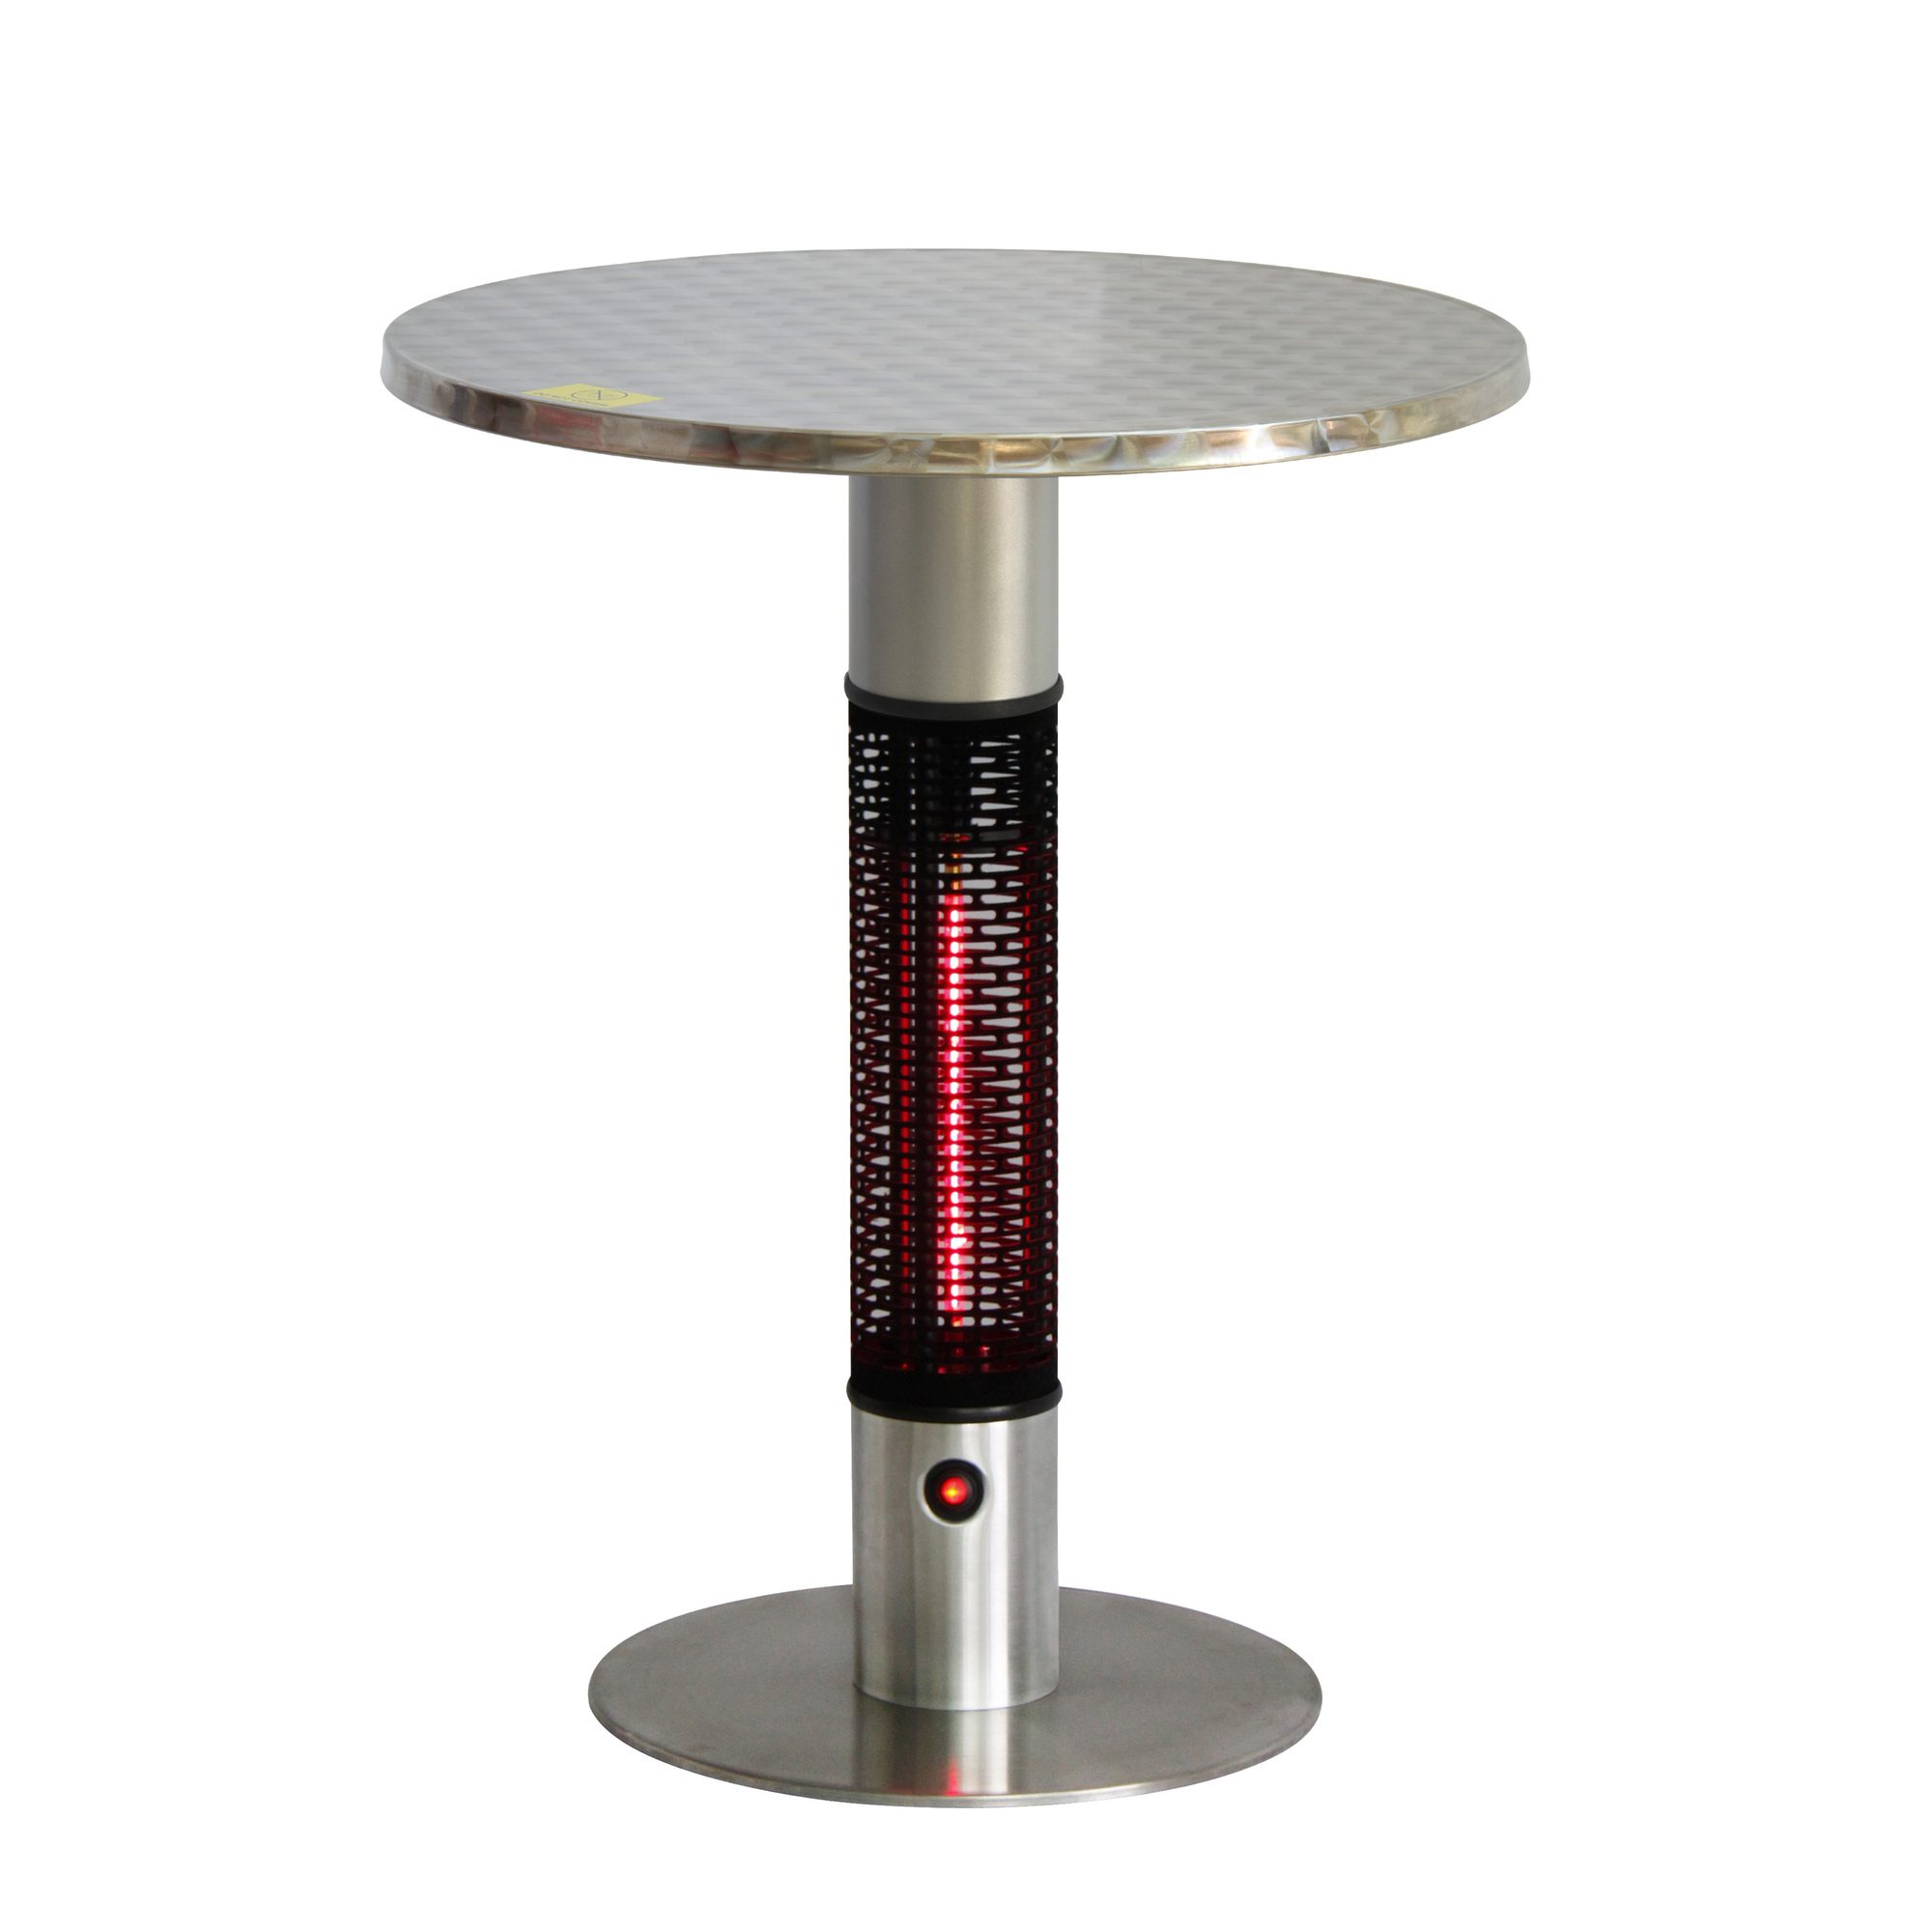 ENERG, Bistro table w patio heat and round stainless top, Model HEA-115J88